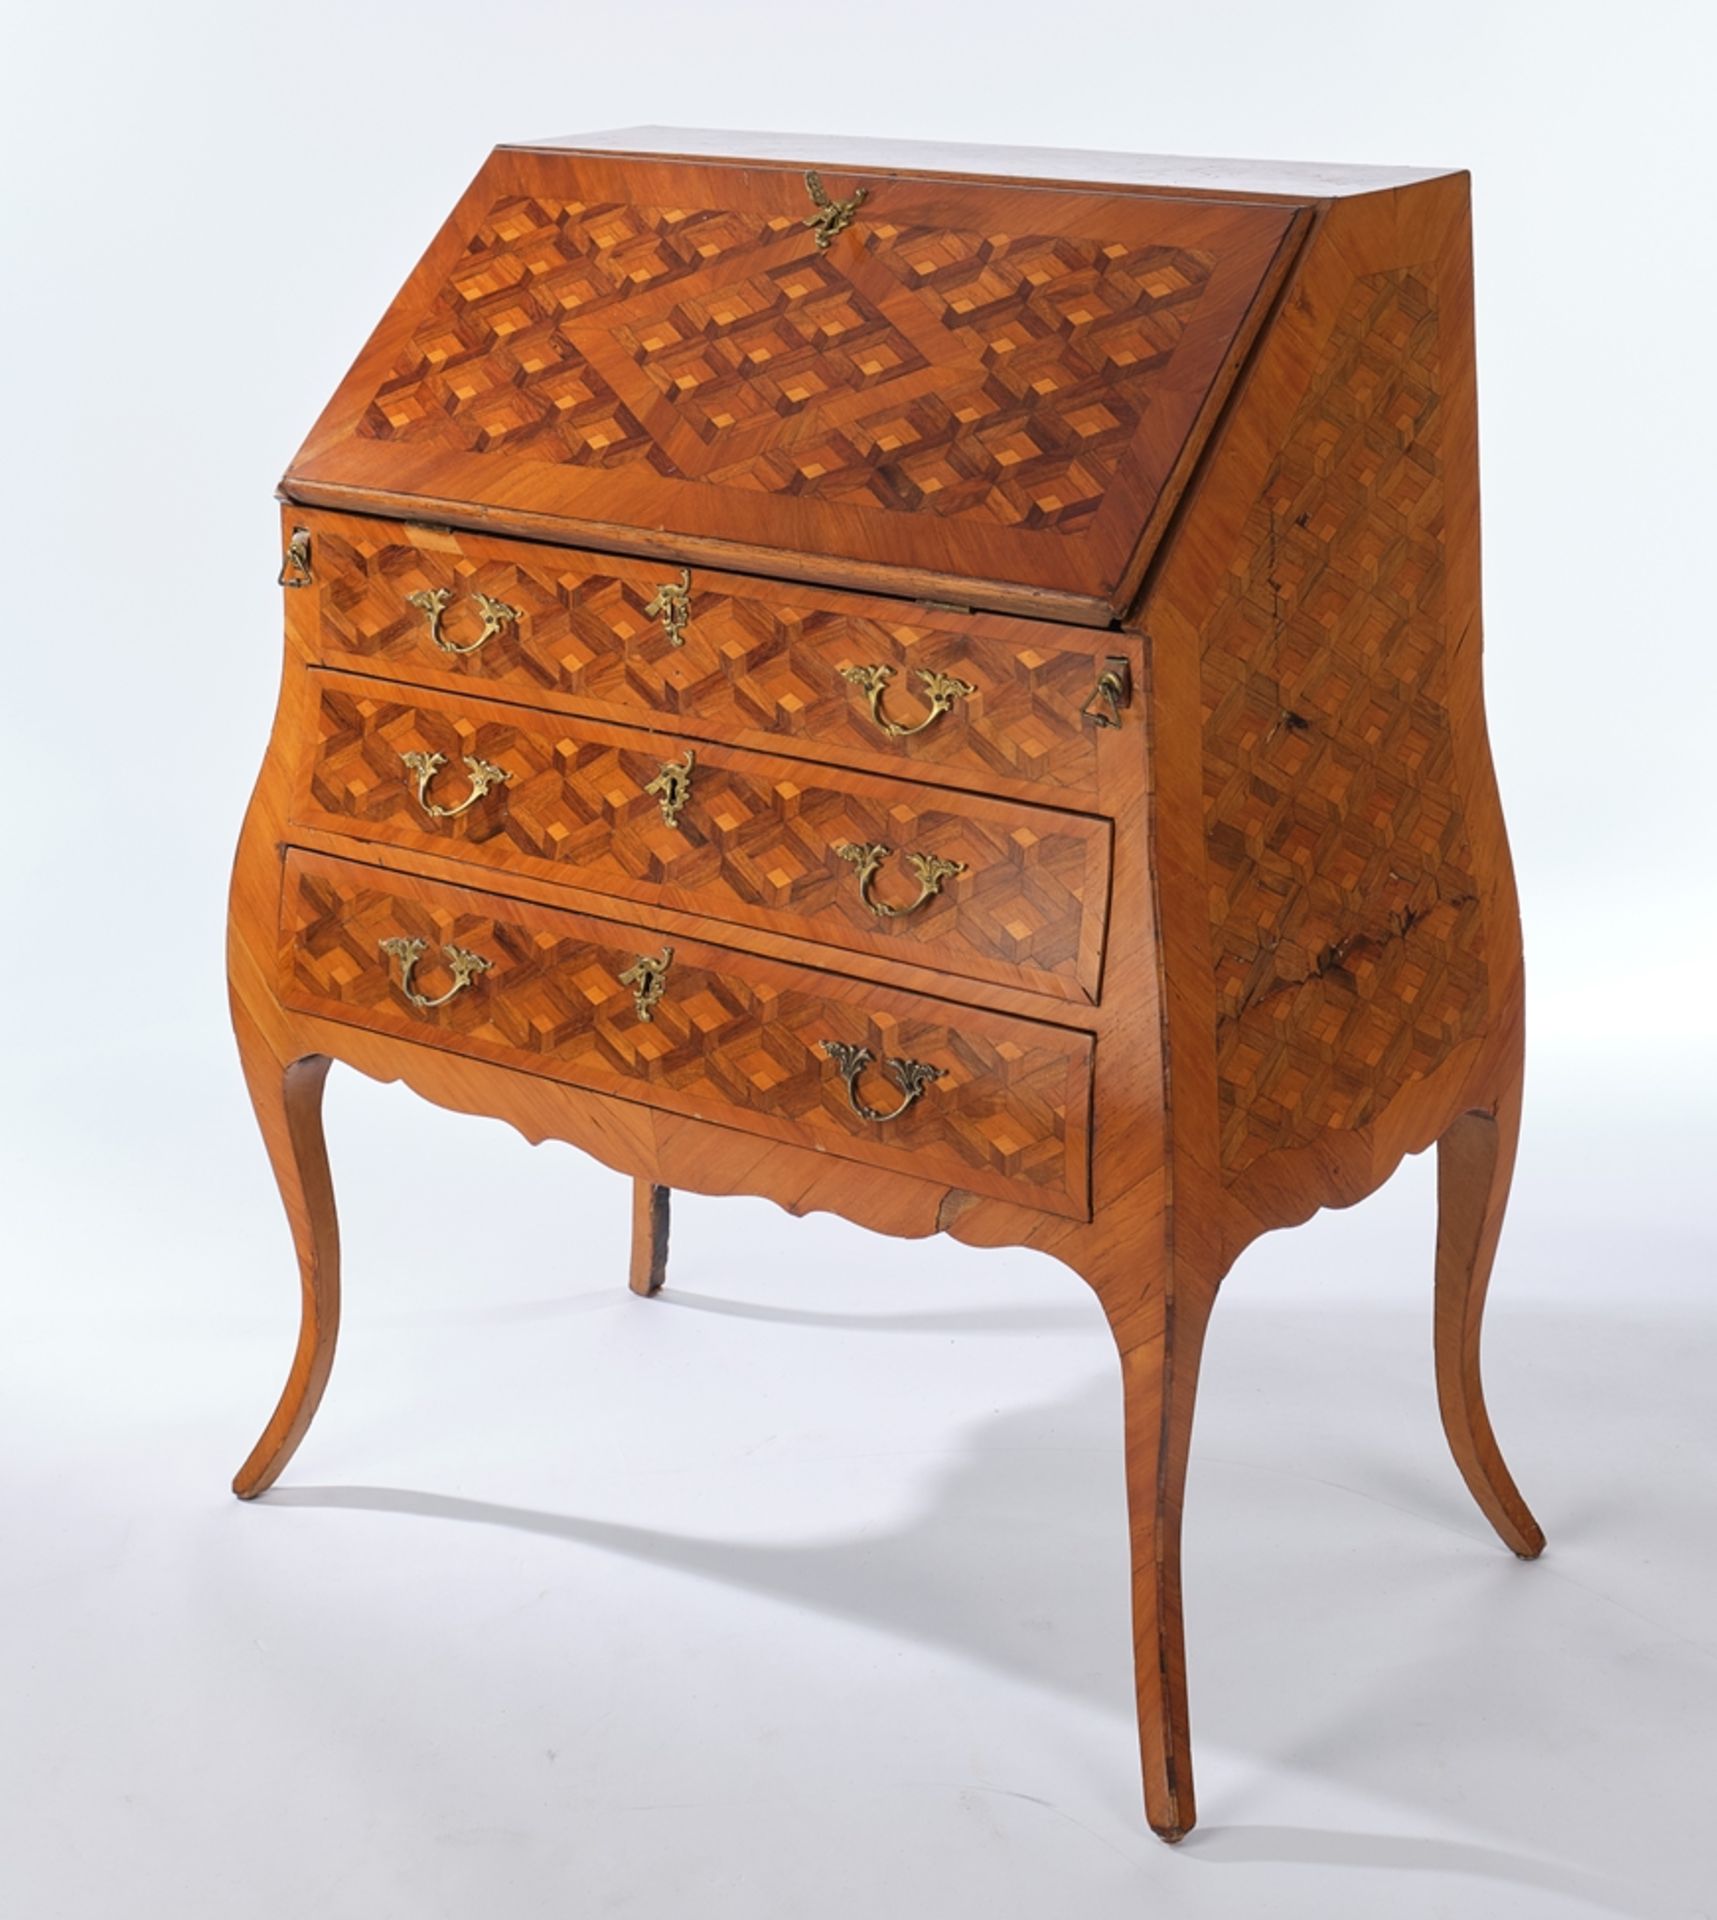 Louis XV style lady's bureau, German, probably 19th cent. walnut and various ornamental woods, camb